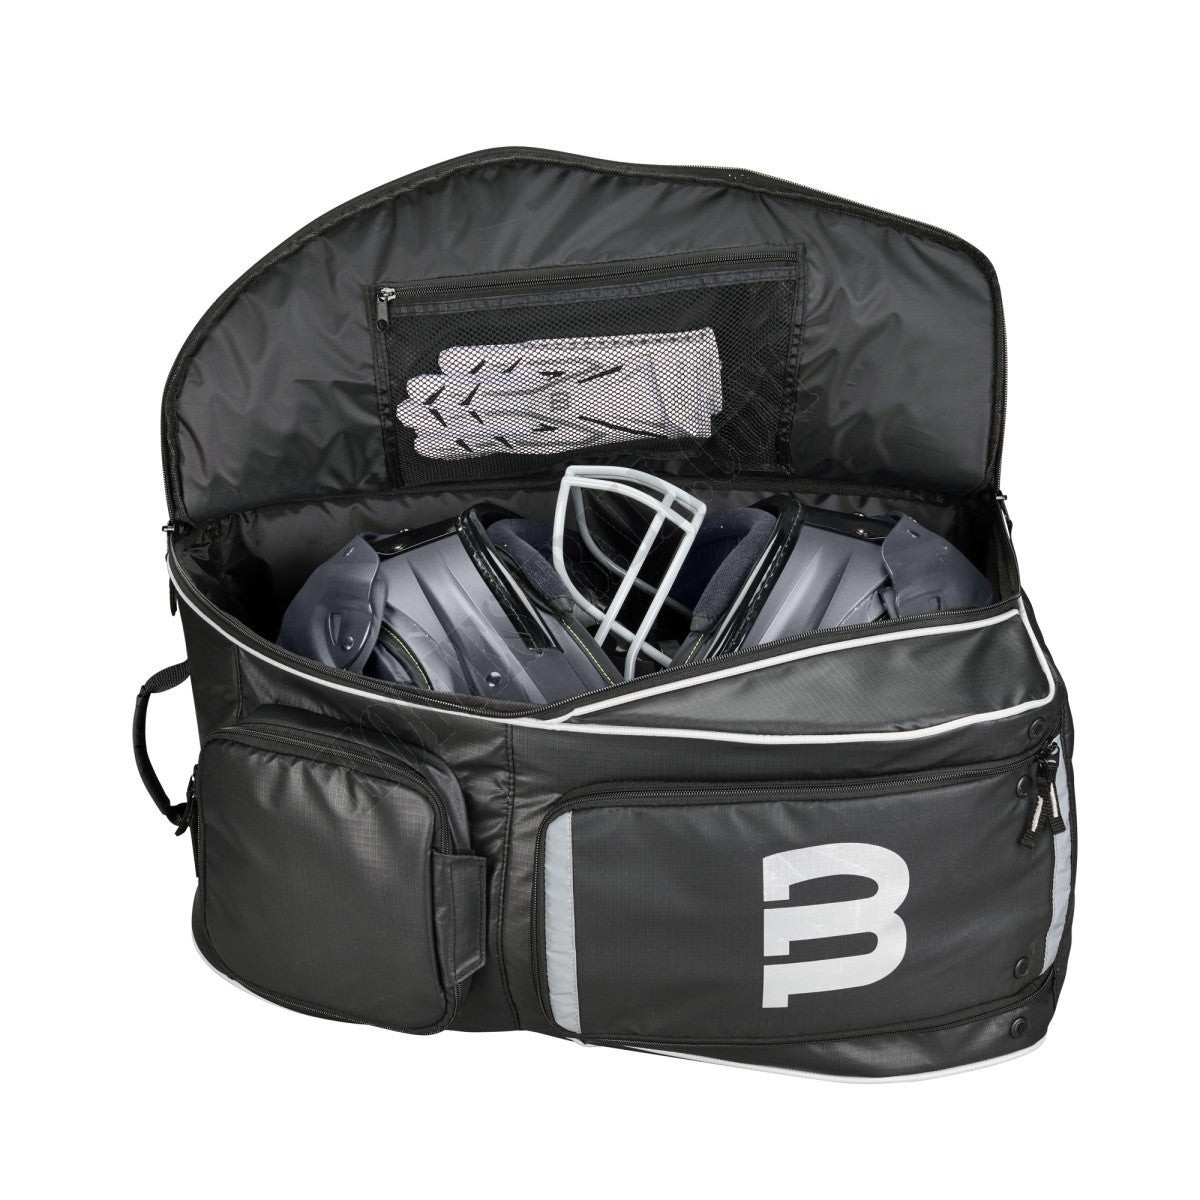 Tackle Football Player Equipment Bag - Wilson Discount Store - -2